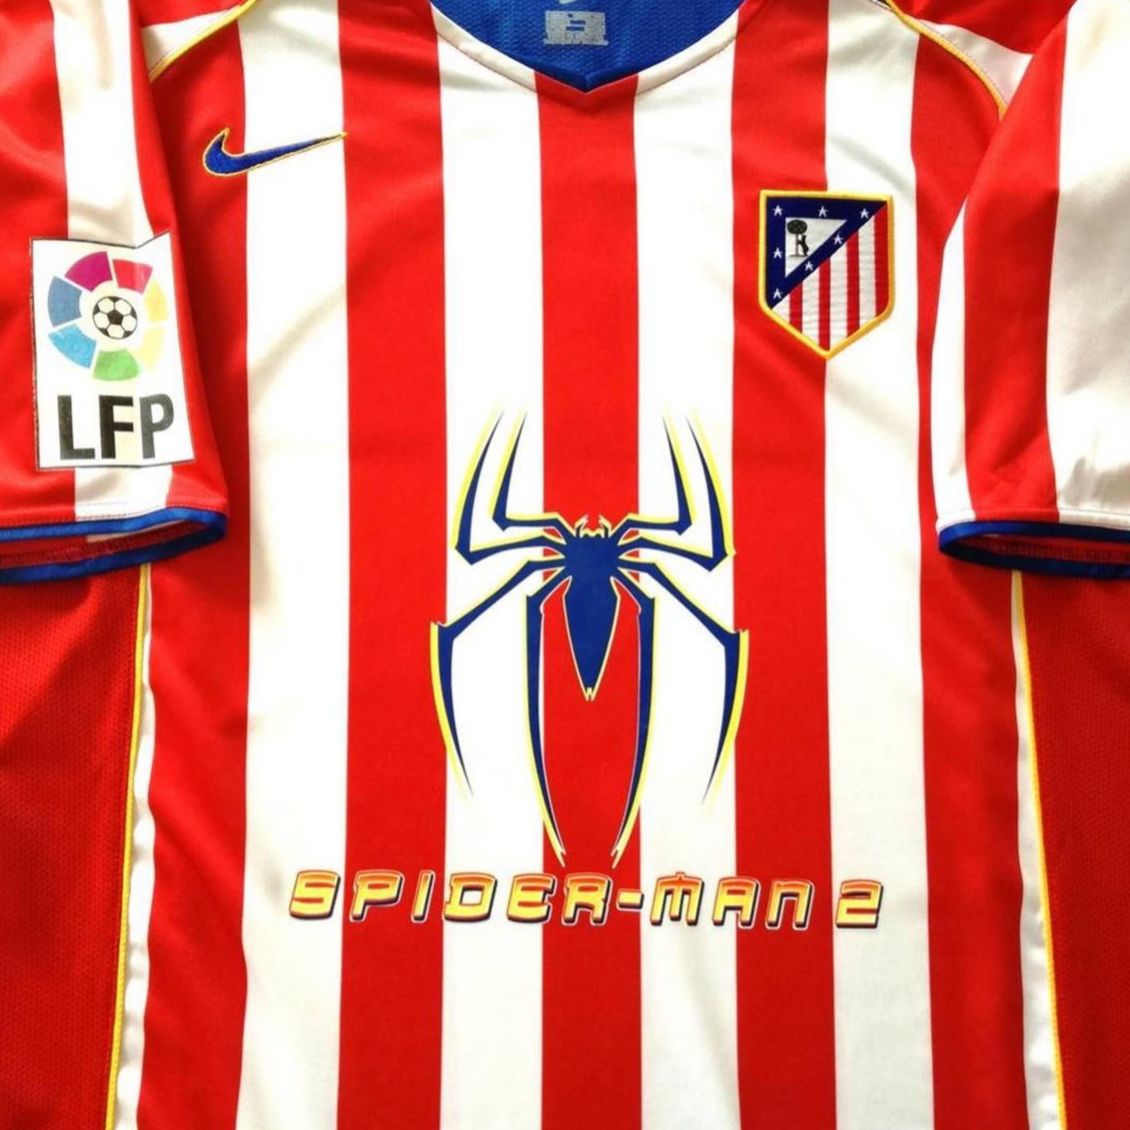 Atletico Madrid 2004/05 Iconic ‘Spider-Man’ Authentic Retro Classic On-Field Player Version Home Kit Jersey - Red